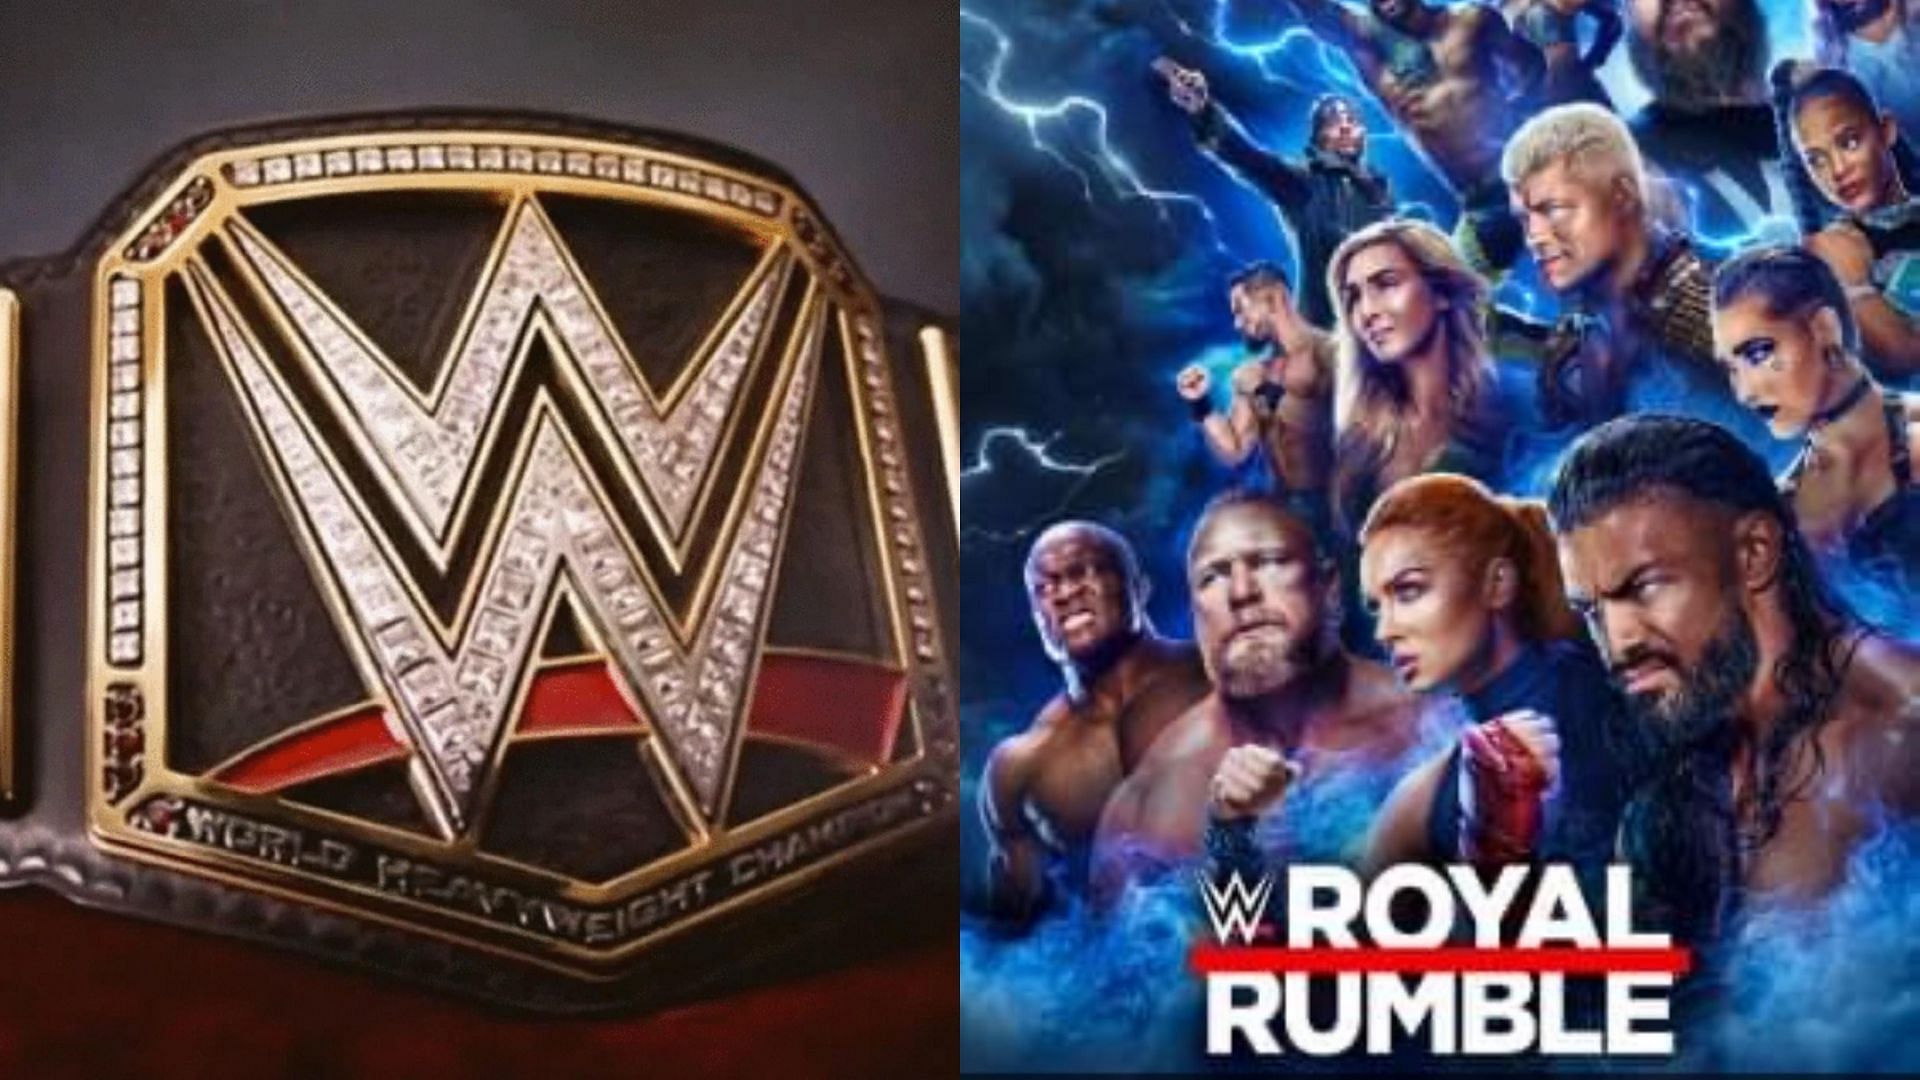 The Royal Rumble will take place on Saturday January 28th 2023.